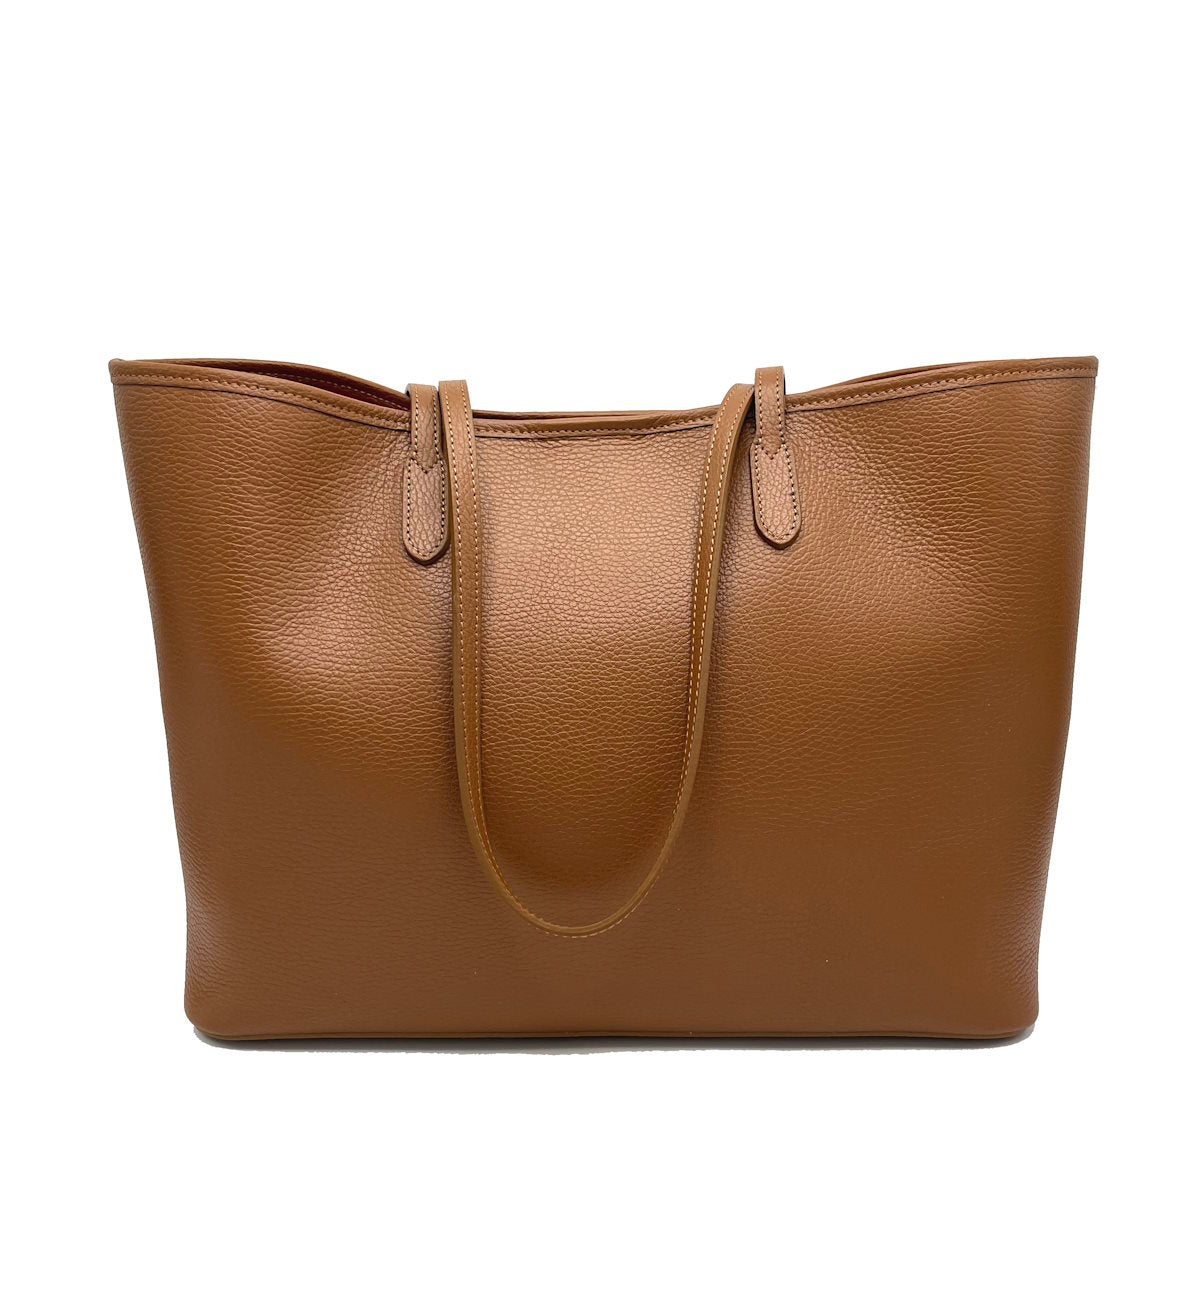 Genuine leather shopping bag, for women, Made in Italy, art. 112418